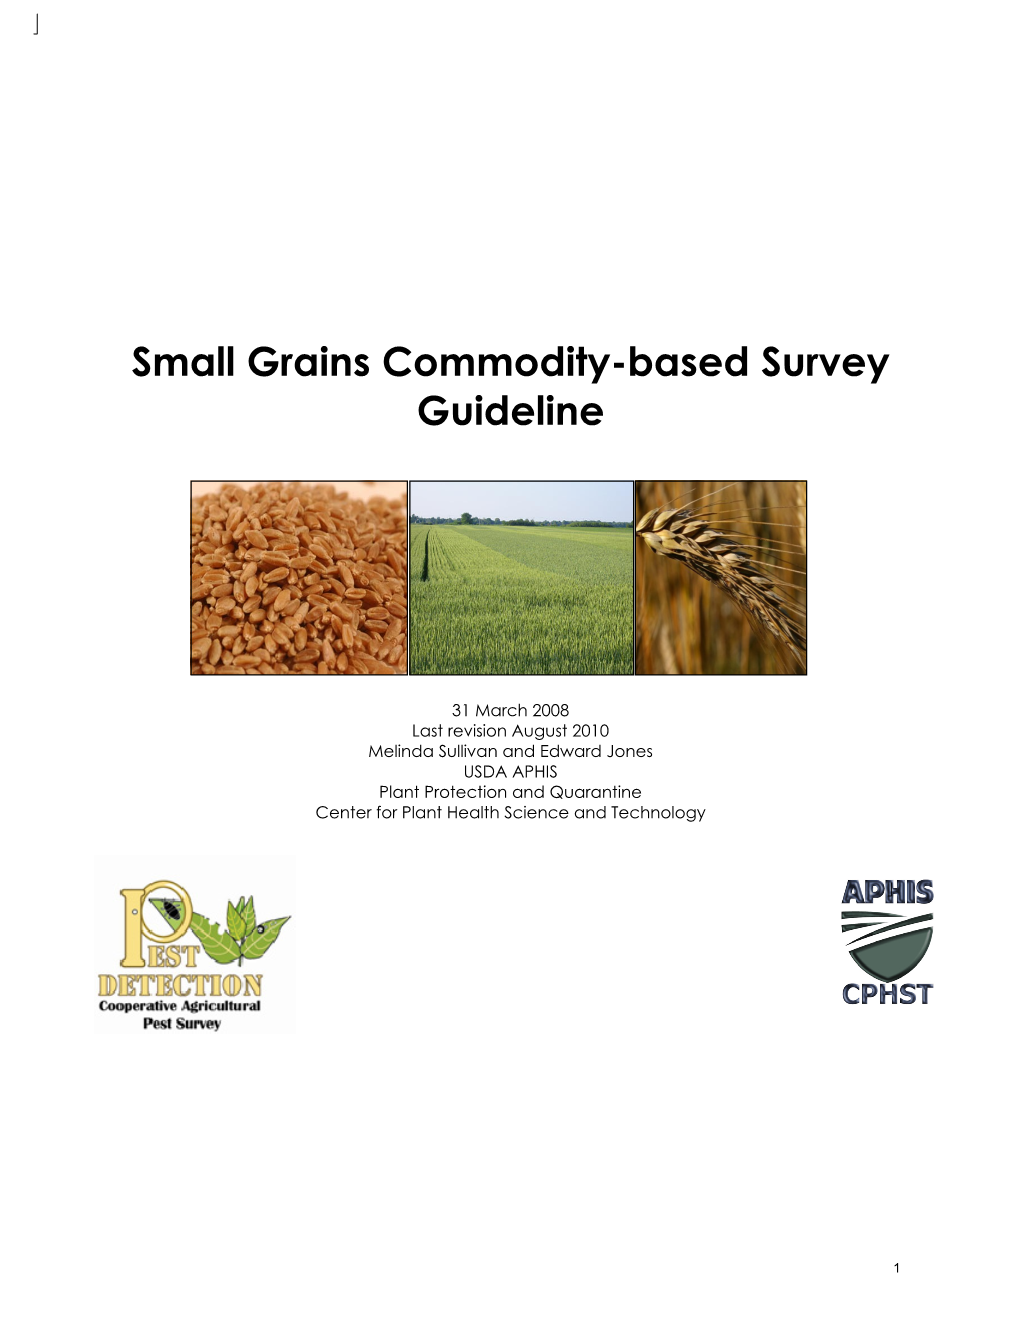 Small Grains Commodity-Based Survey Guideline